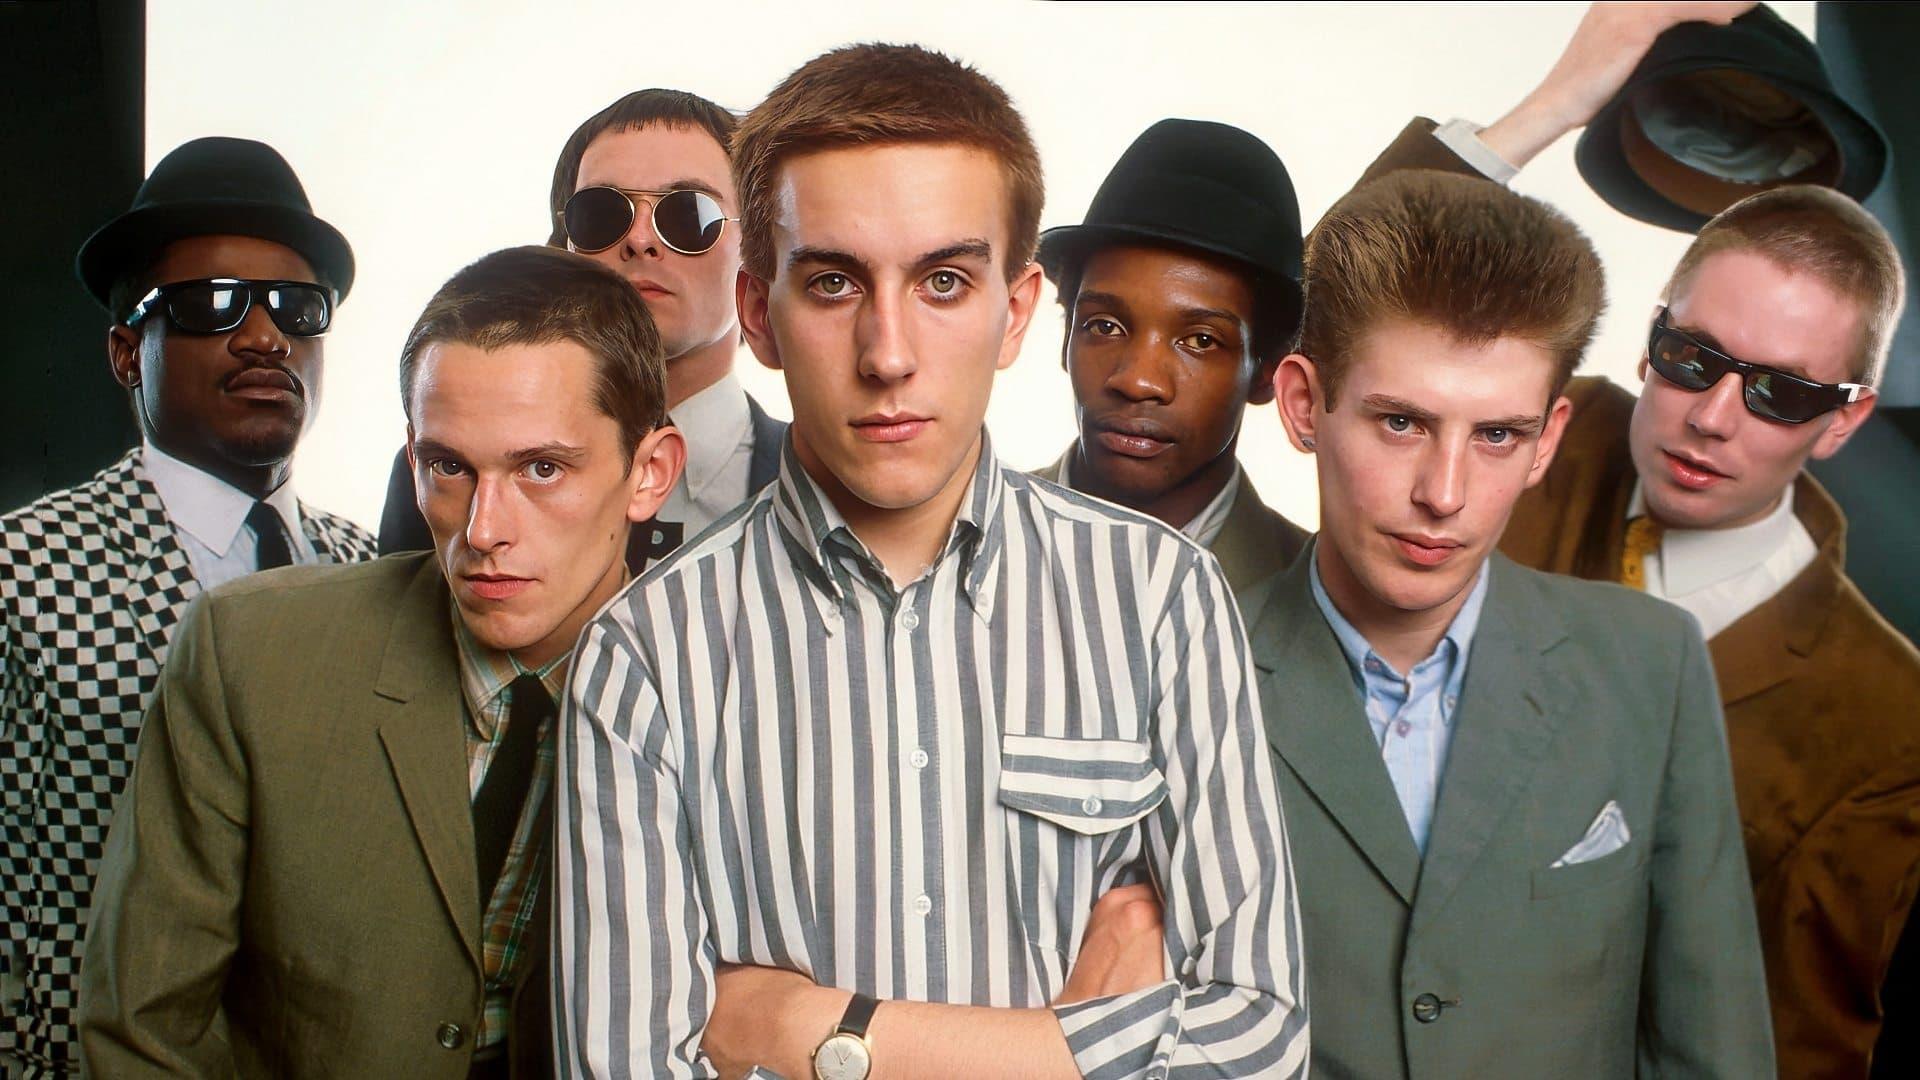 Terry Hall At The BBC backdrop